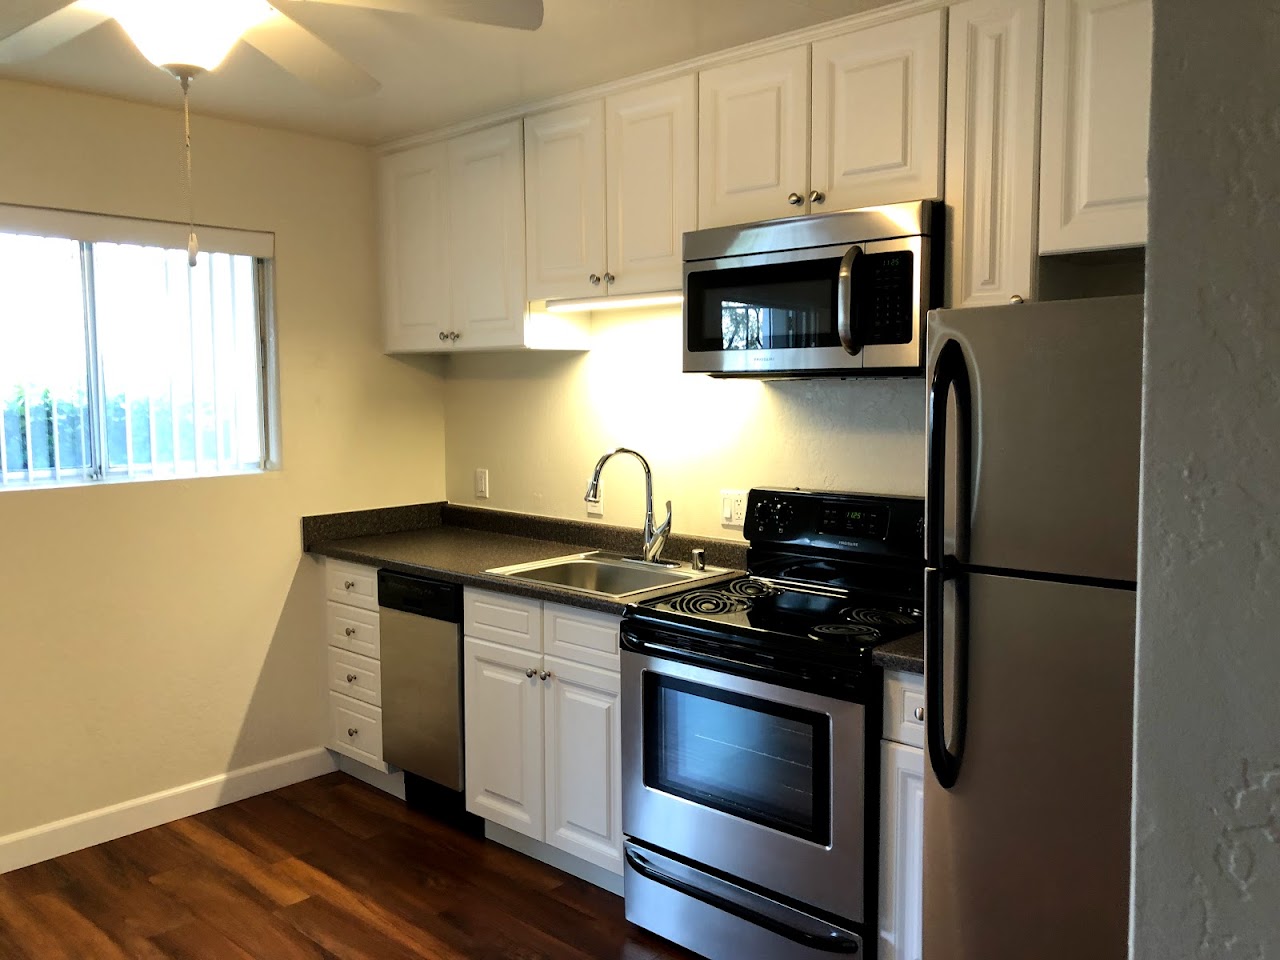 Photo of WINDSOR REDWOODS. Affordable housing located at 100 KENDALL WAY WINDSOR, CA 95492